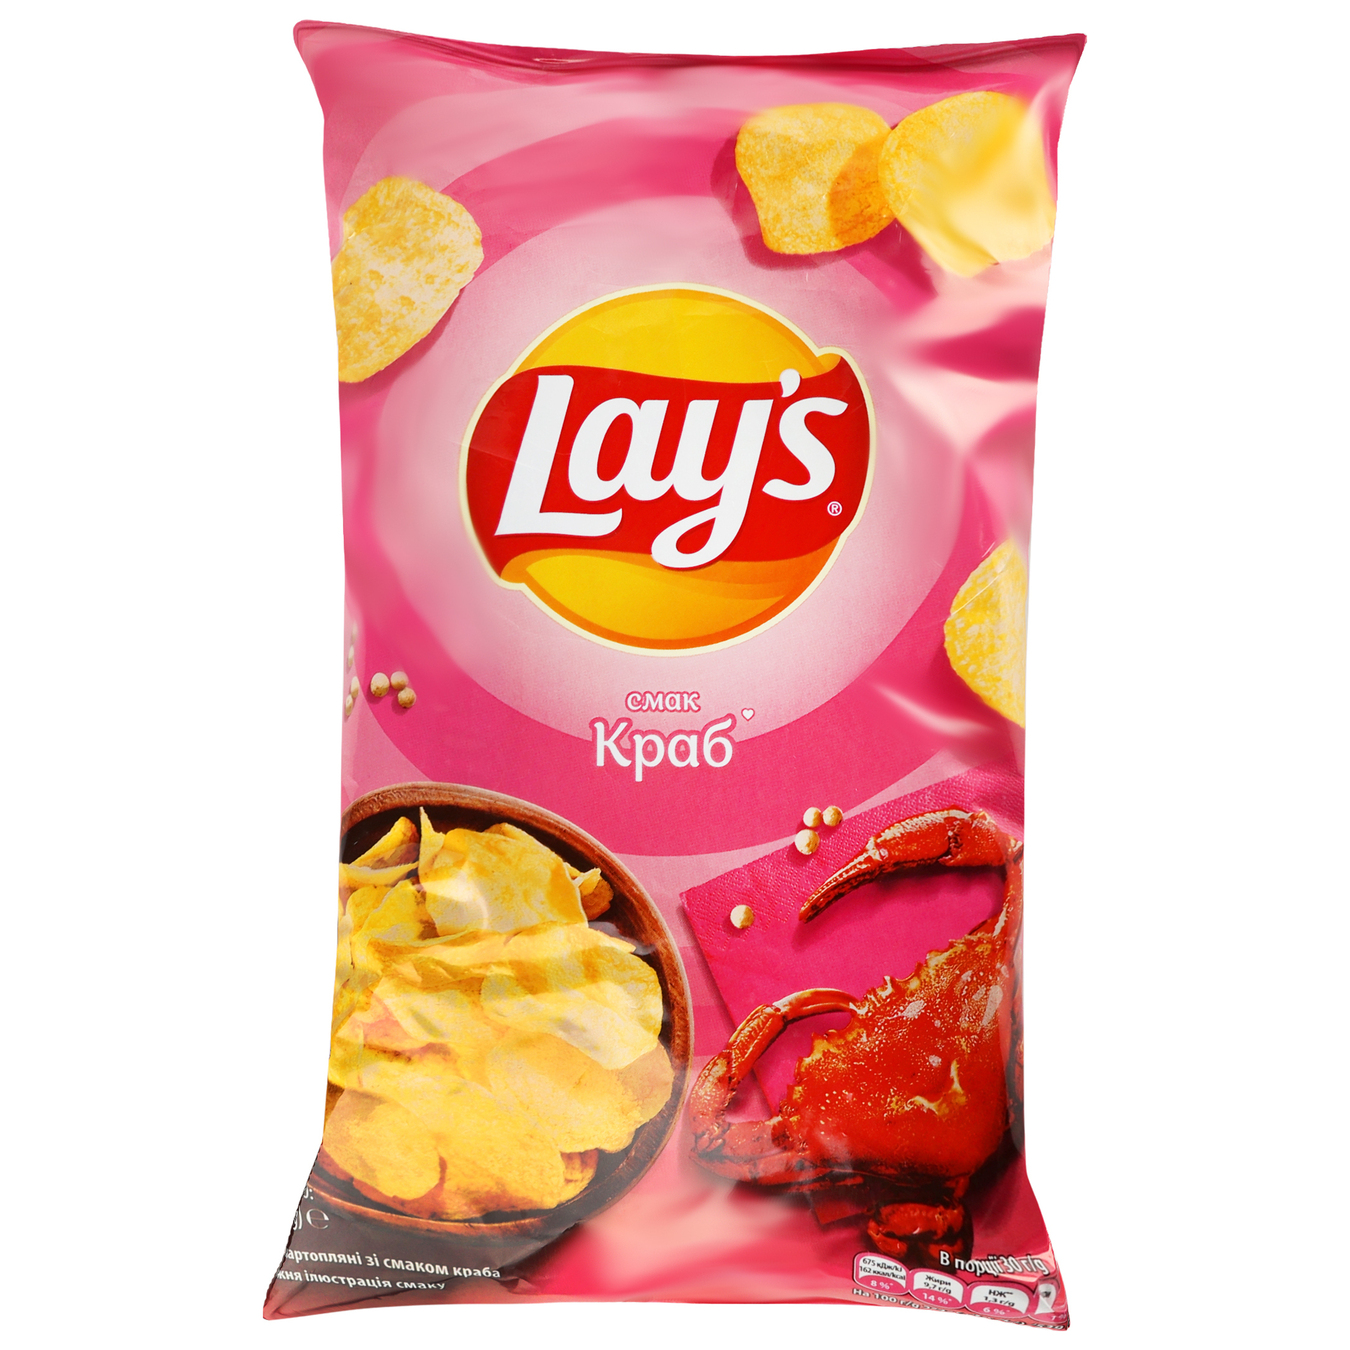 Lay's potato chips crab flavor 120g